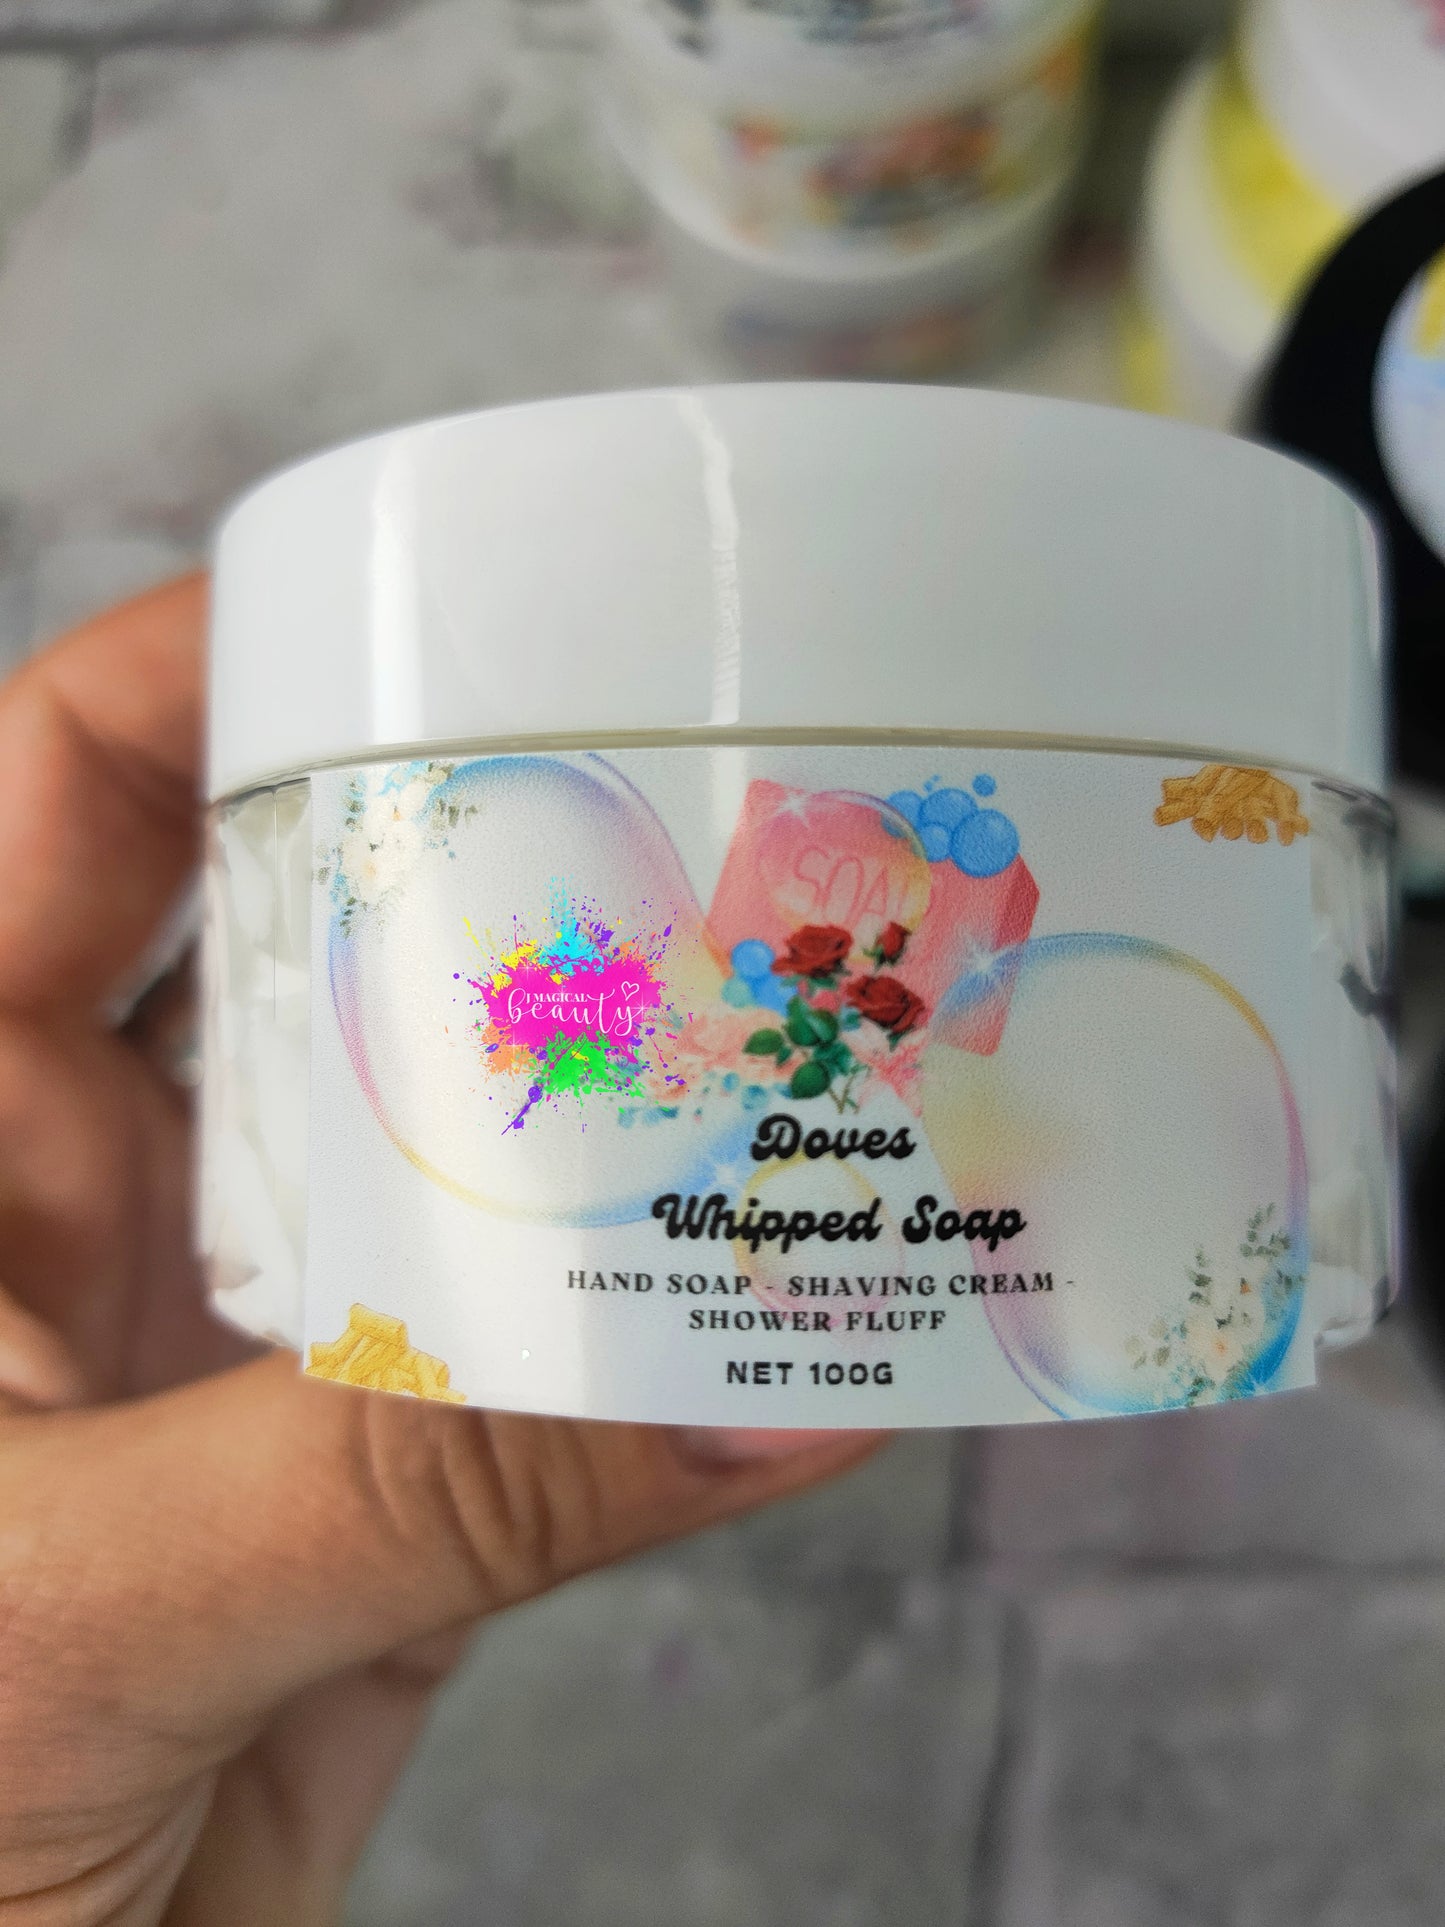 Whipped Soap Doves scent